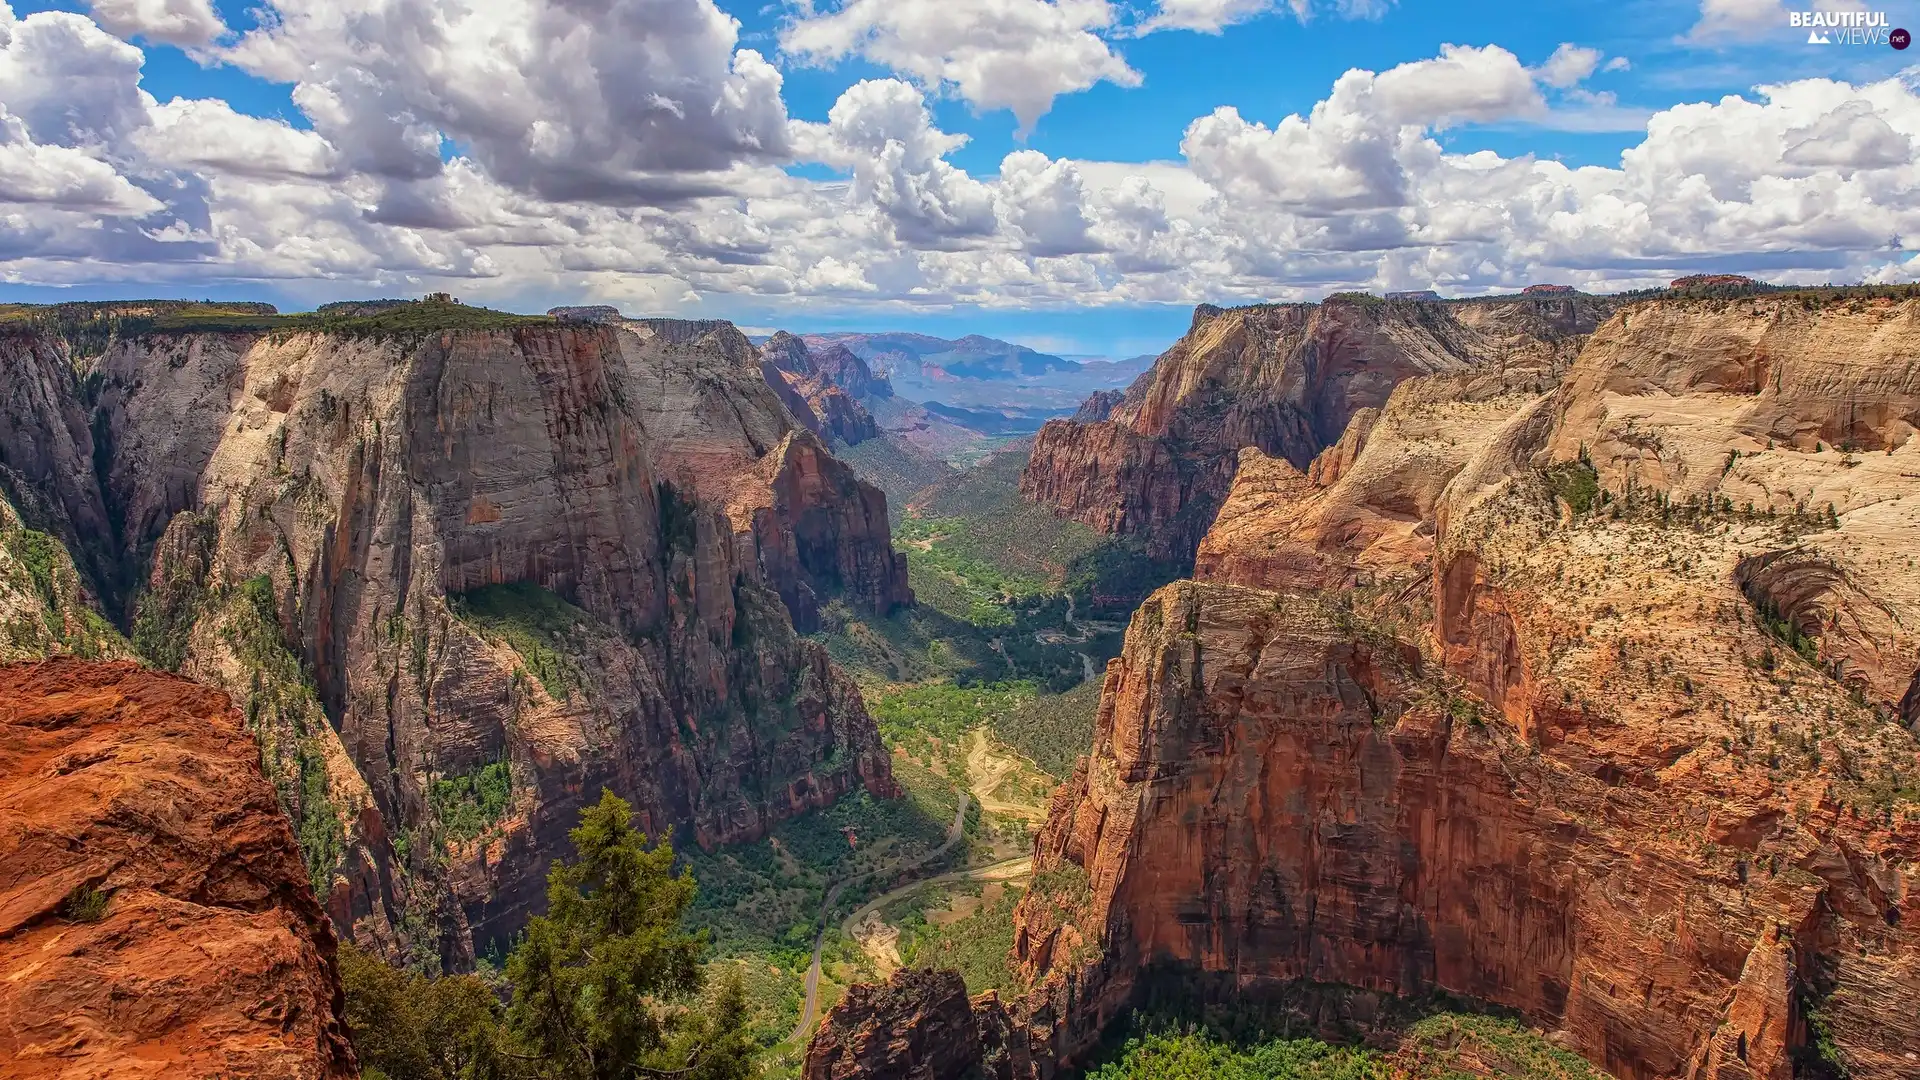 Zion Canyon, Plants, The United States, Zion National Park, Utah State, canyon, Mountains, canyon